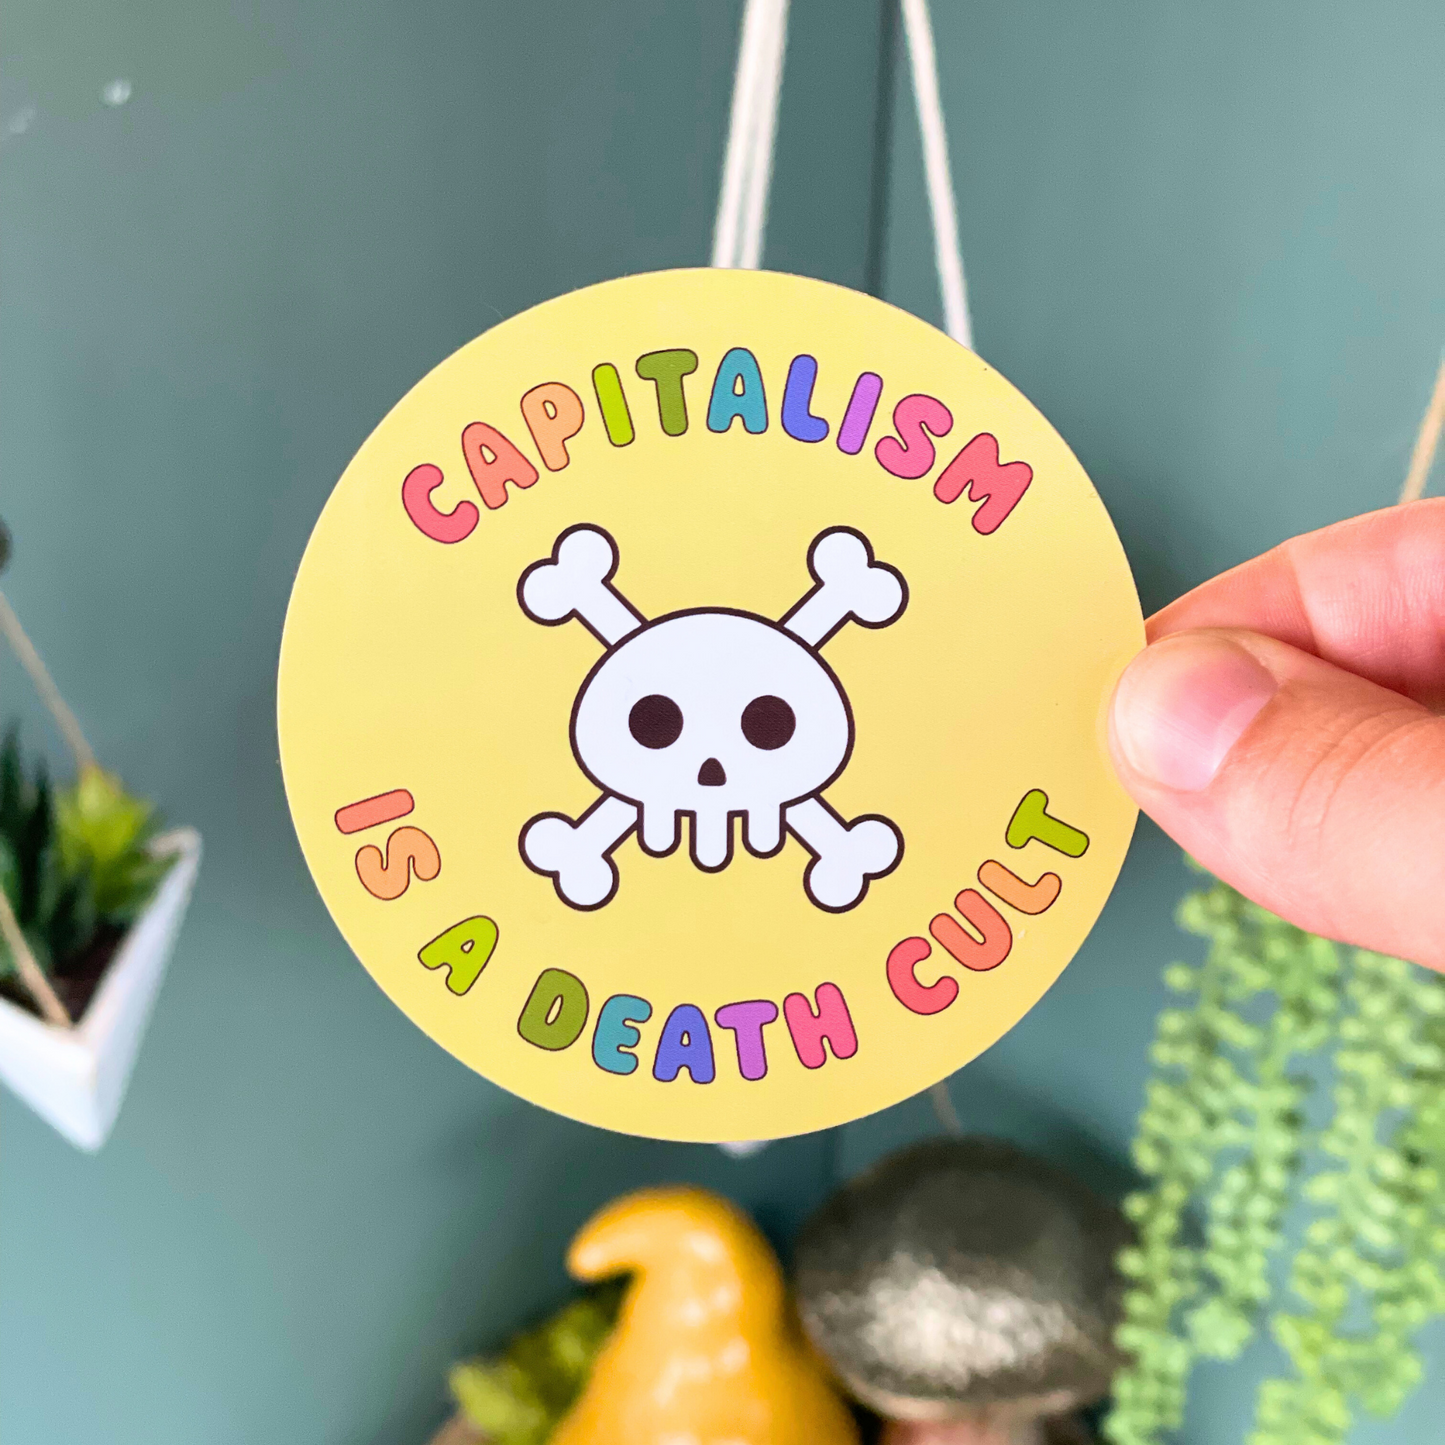 Capitalism Is A Death Cult Sticker